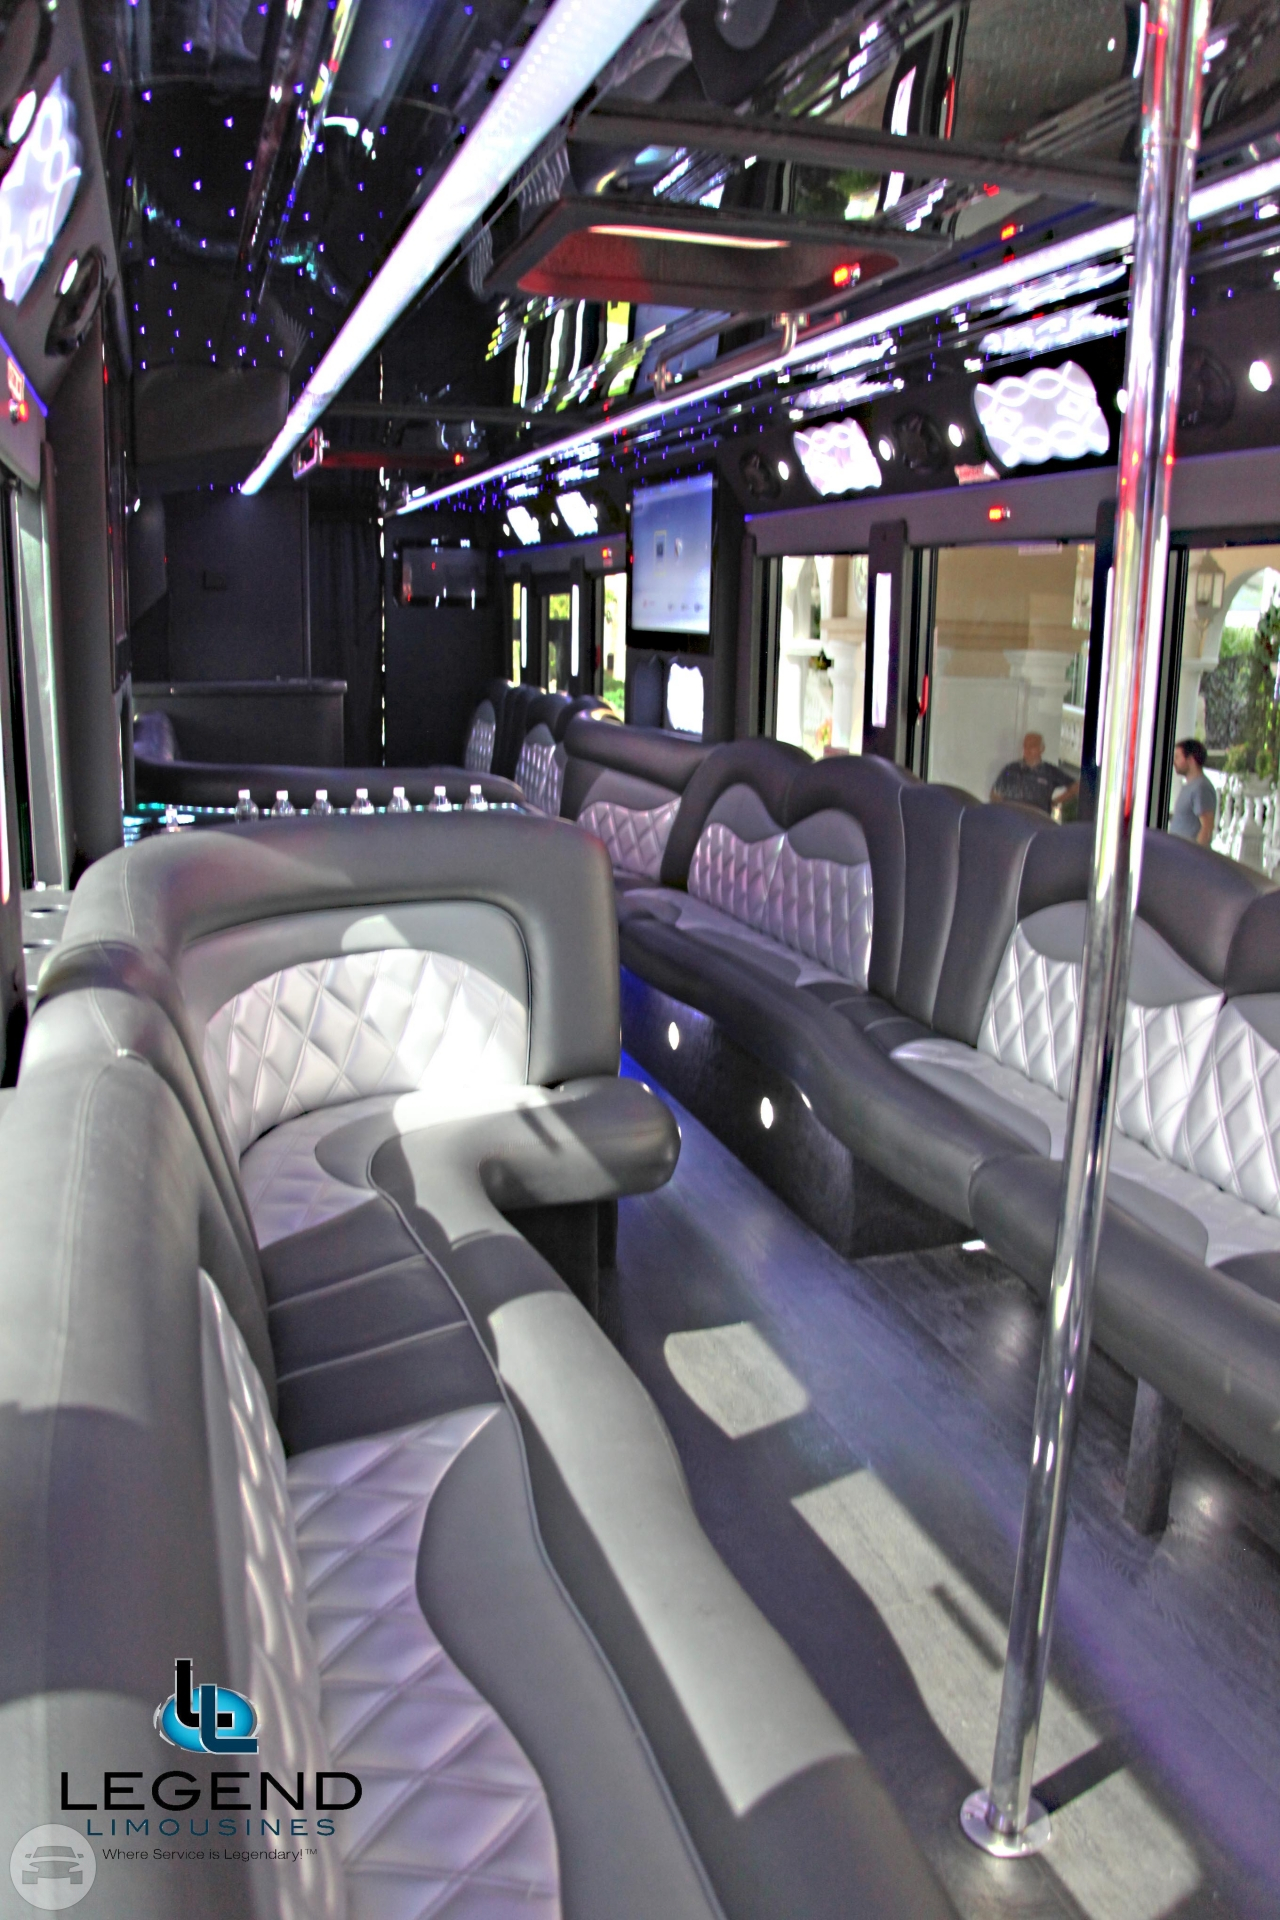 Black and White 46 Passenger Party Bus
Party Limo Bus /
New York, NY

 / Hourly $0.00
